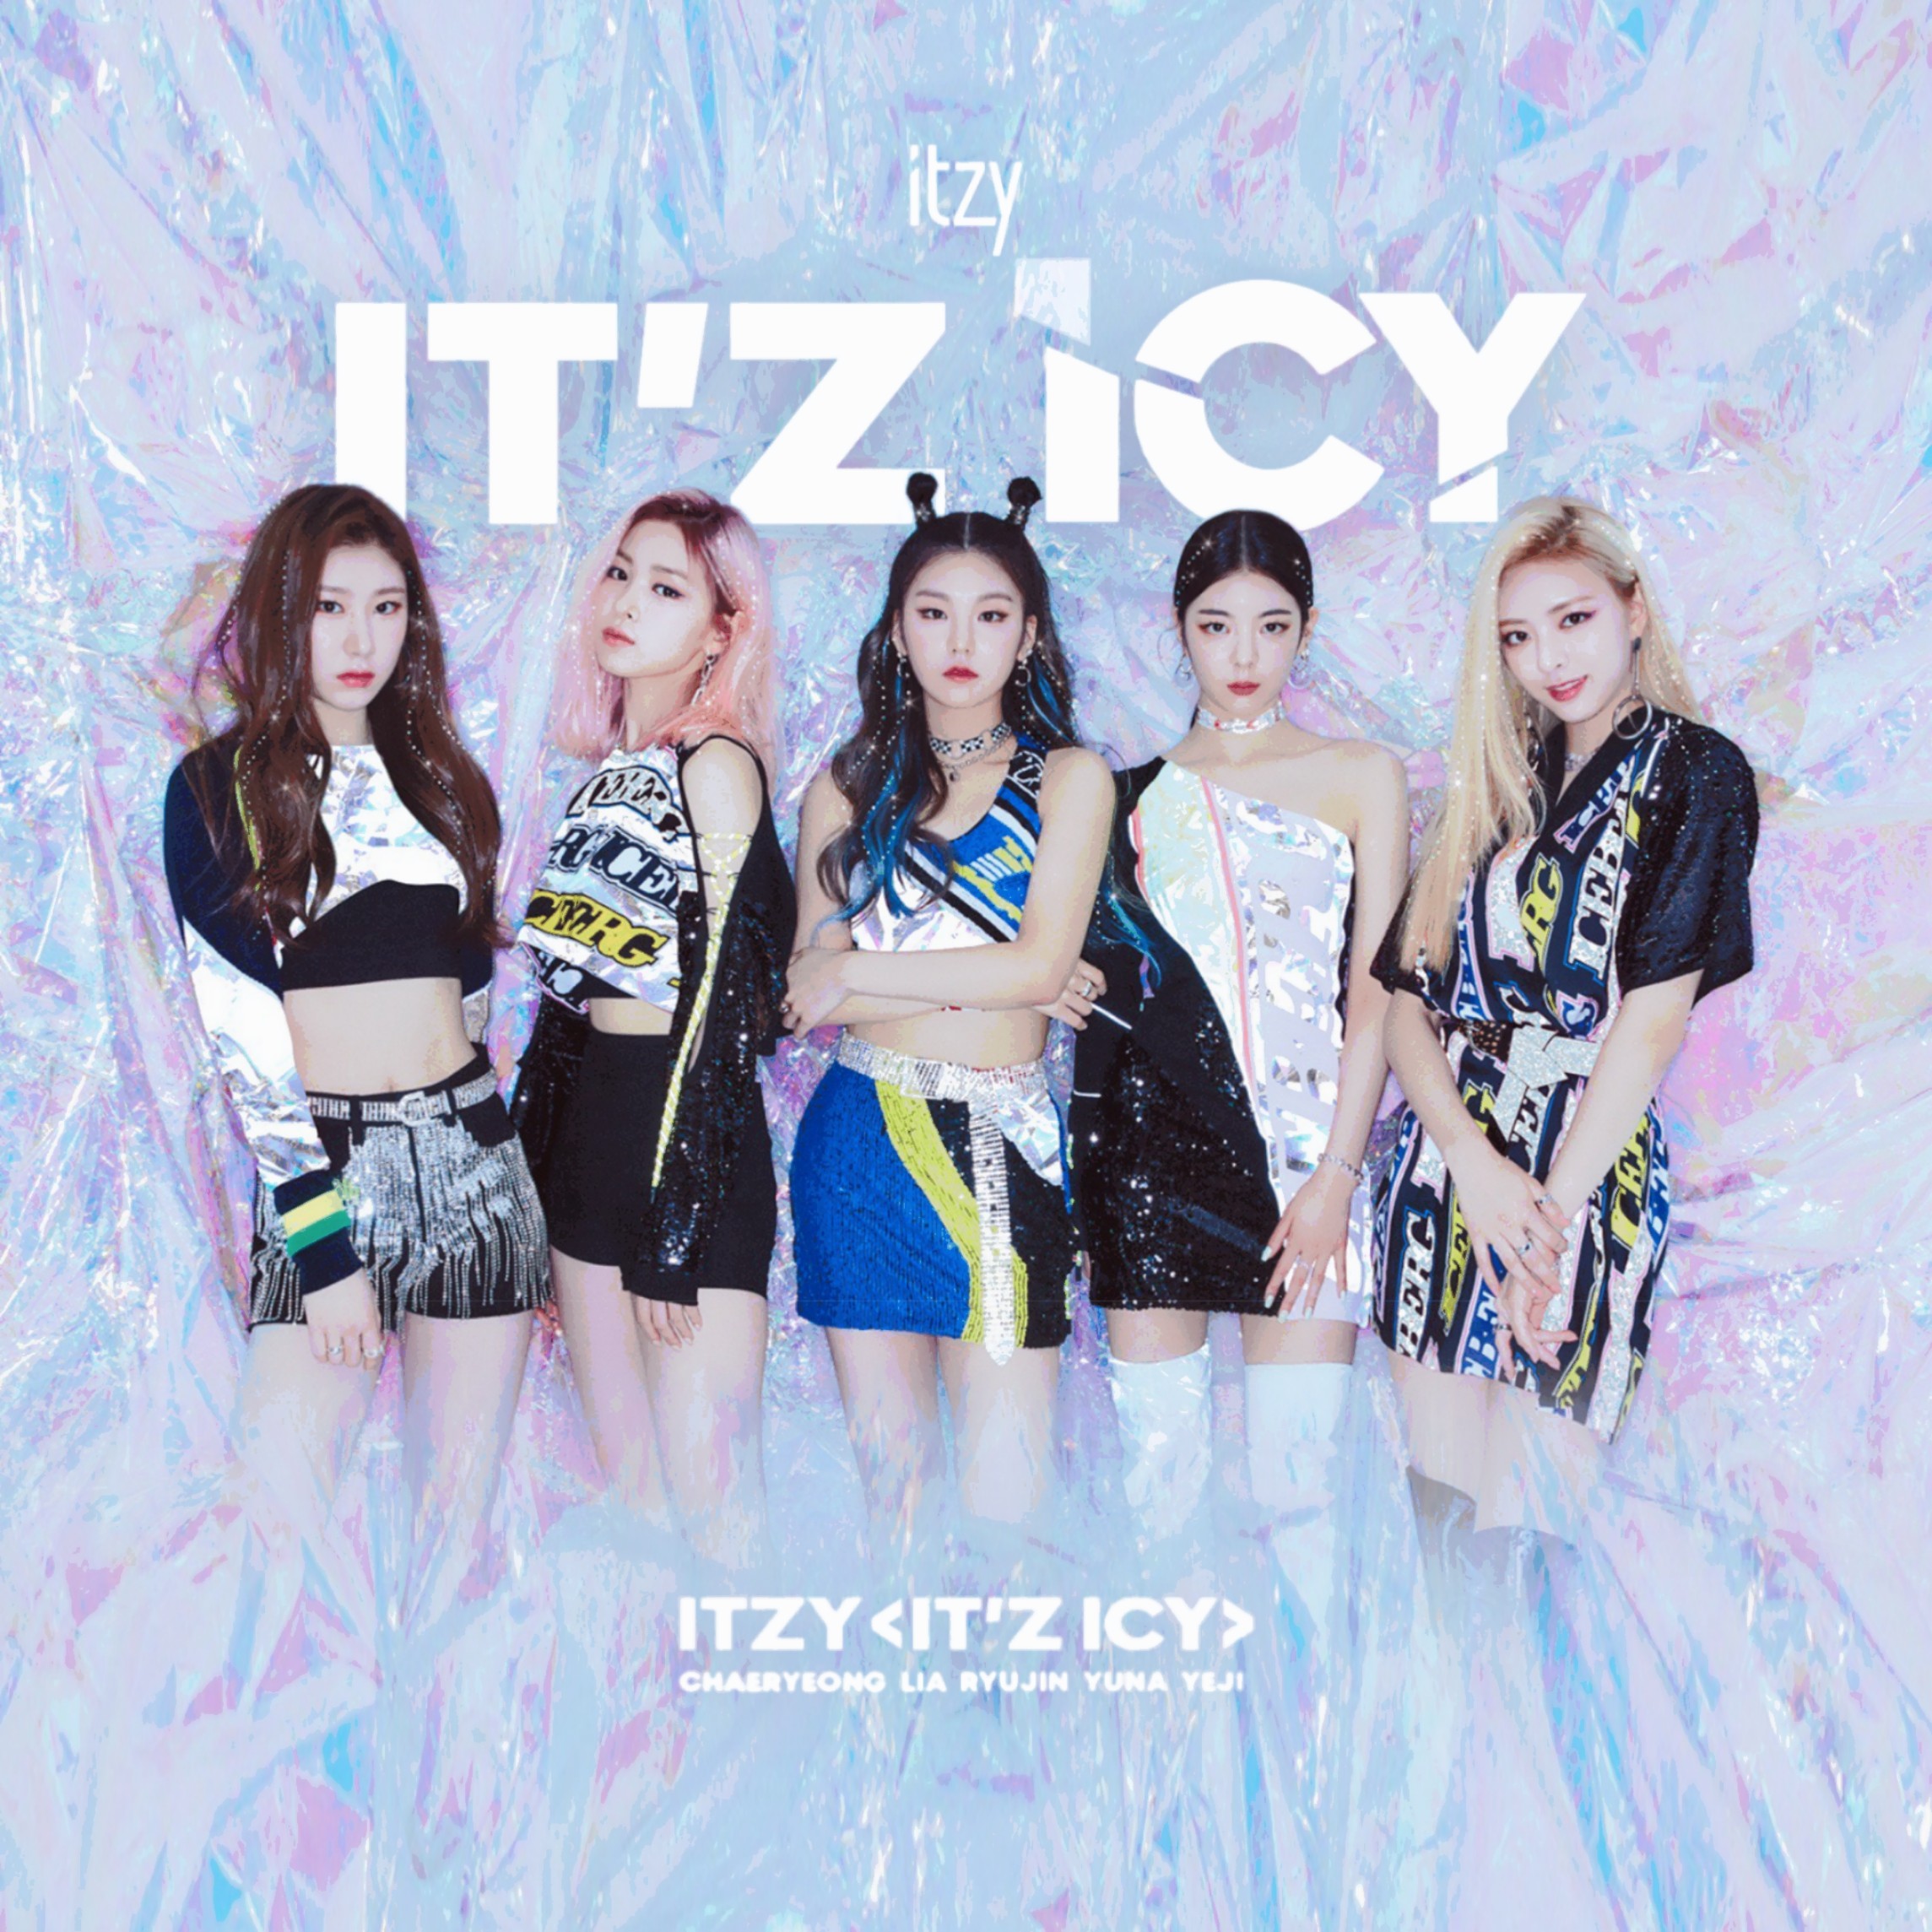 ITZY ICY / IT'Z ICY album cover by LEAlbum on DeviantArt